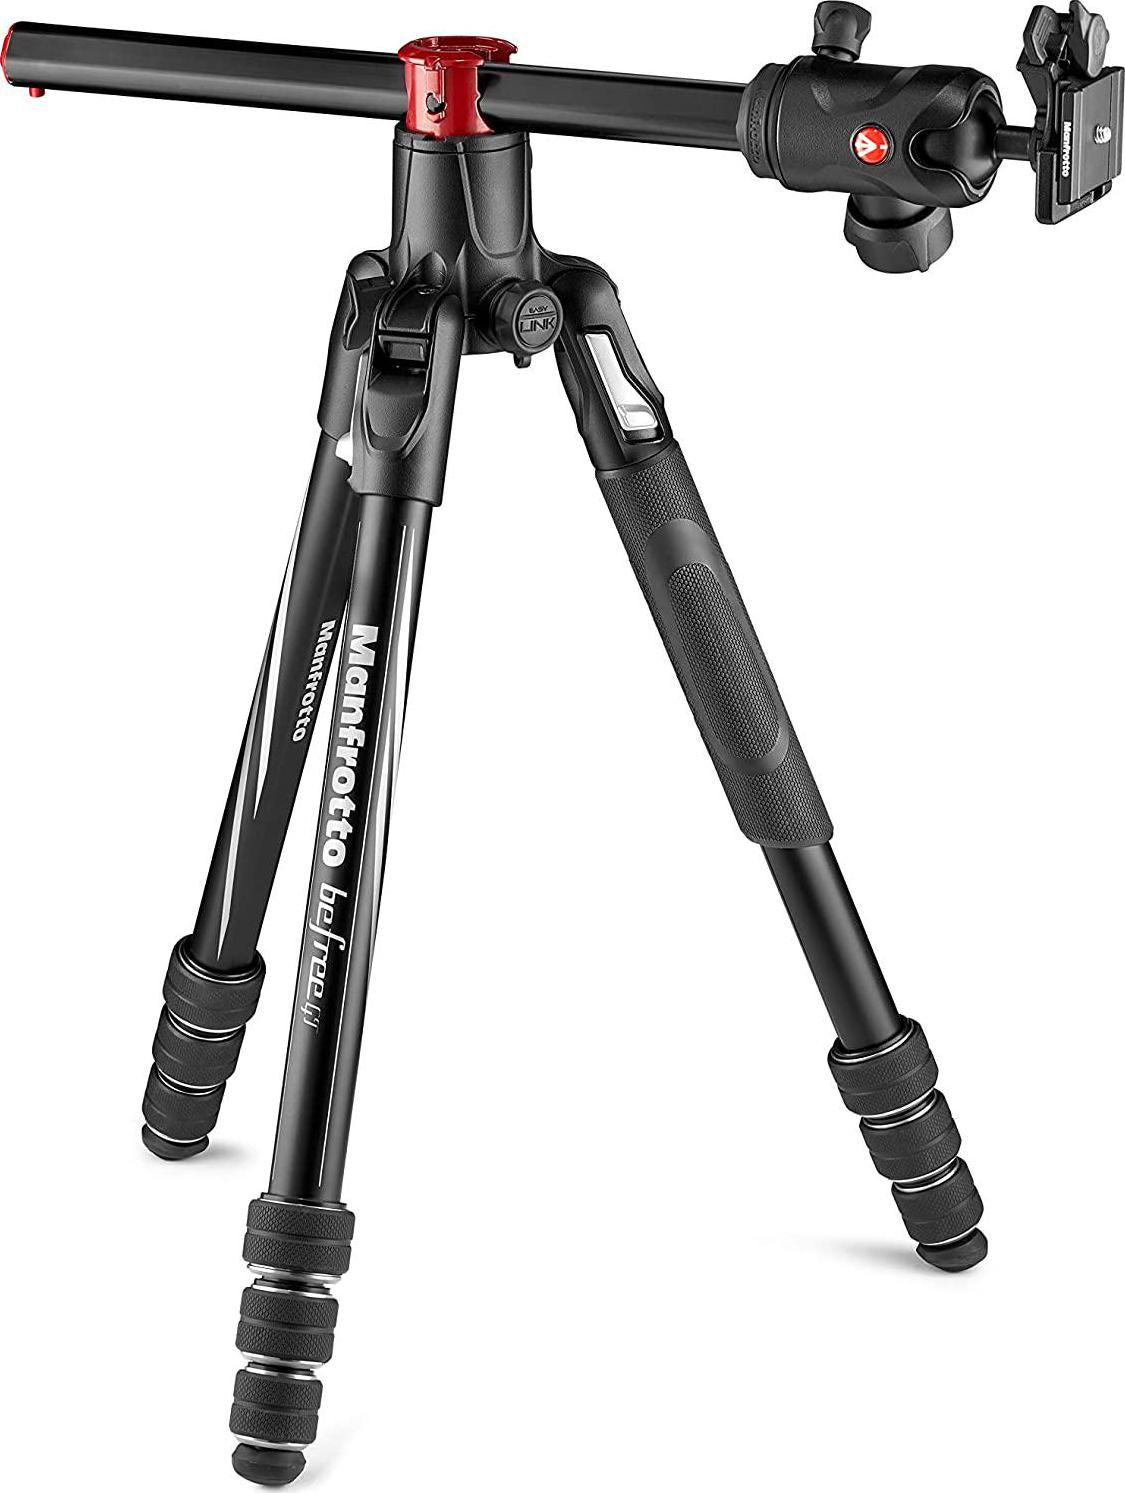 Manfrotto, Manfrotto Befree GT XPRO Aluminium Tripod - 496 Centre Ball Head - M-Lock System - 90 Degree Column - 200PL-PRO Plate - for DSLRs and CSC with Long Lenses - Macro Photography - MKBFRA4GTXP-BH, Black